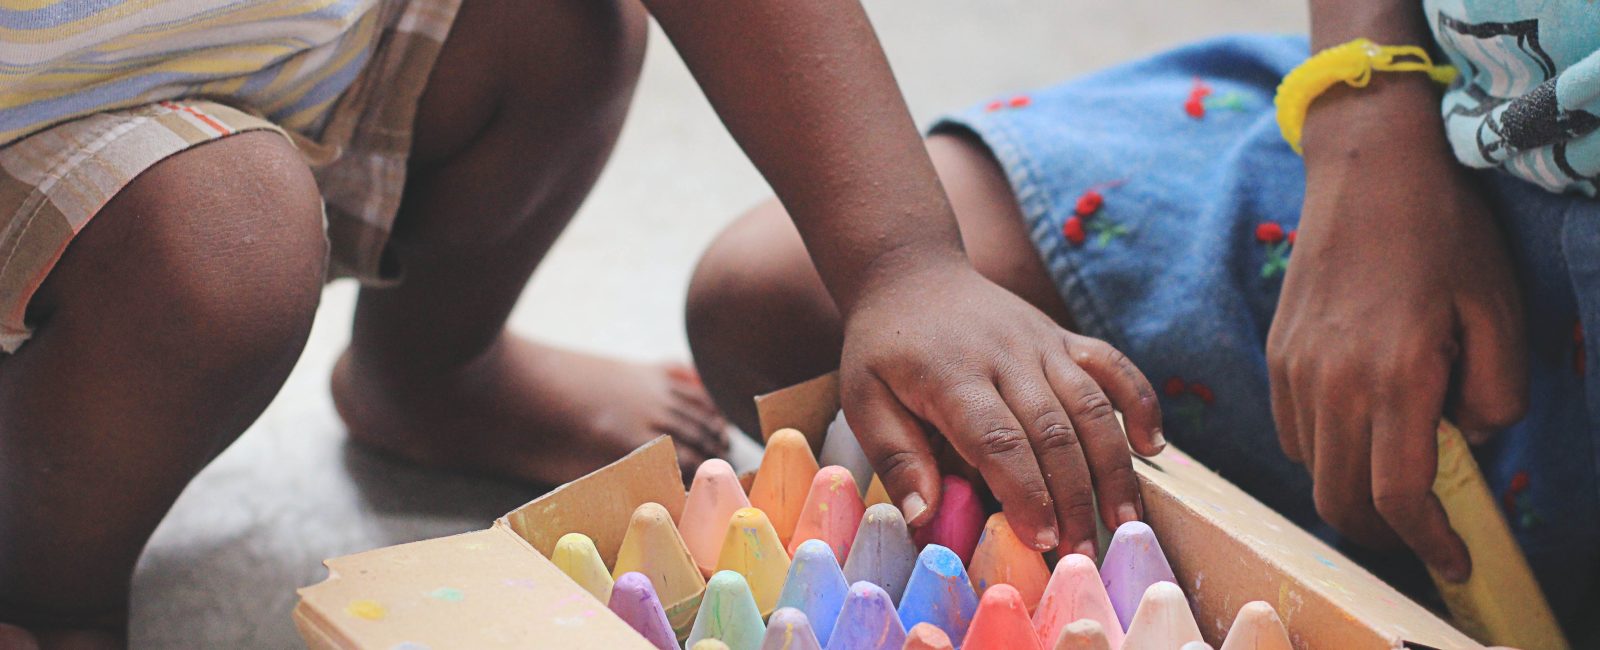 Children playing with crayons